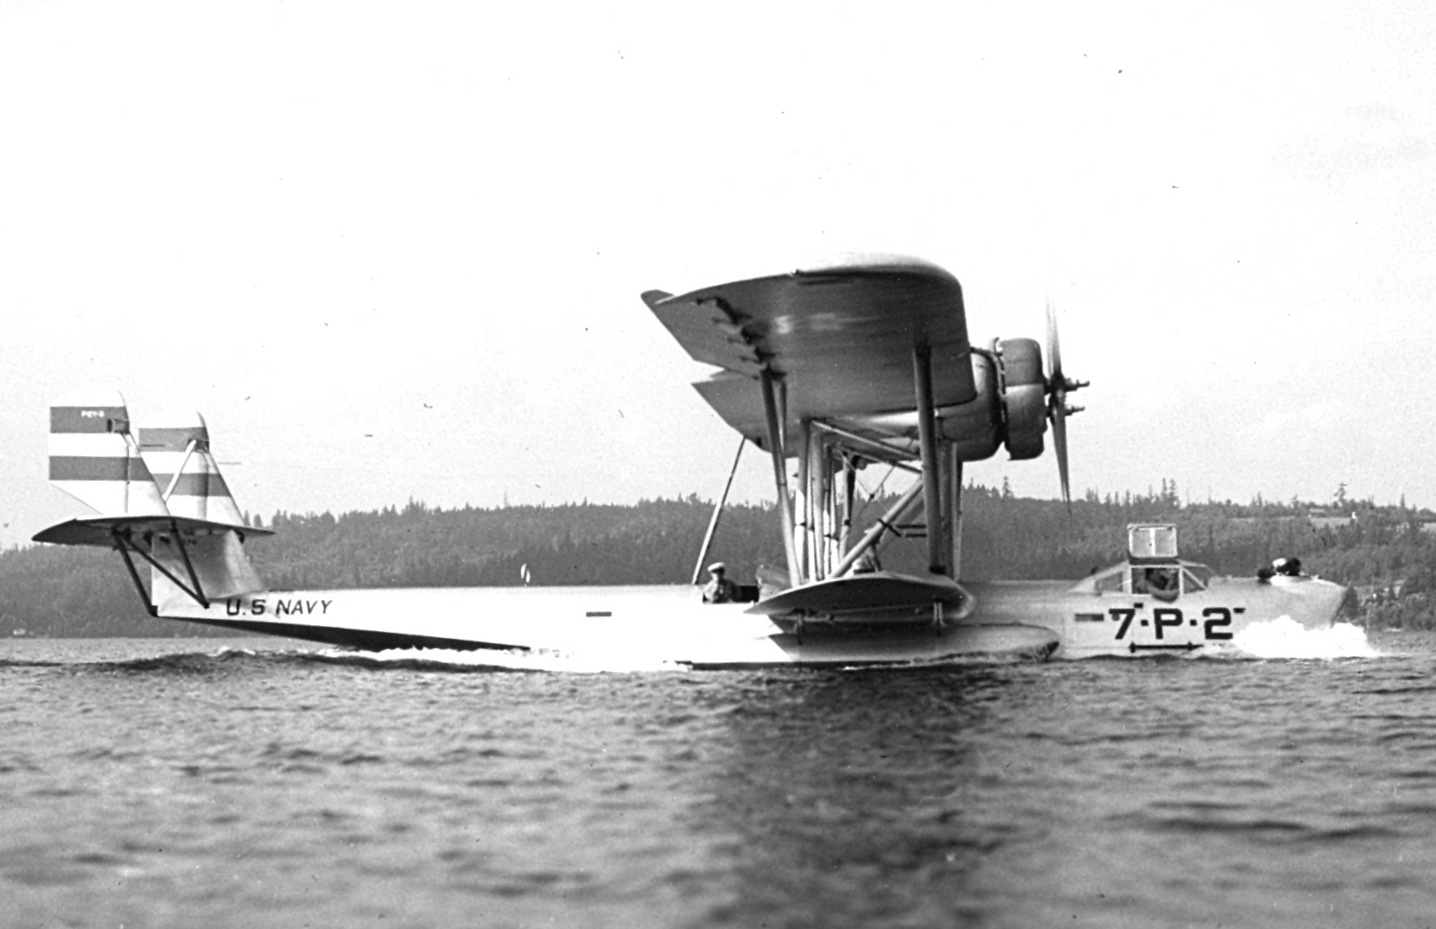 P2Y aircraft taxiing on water, date unknown